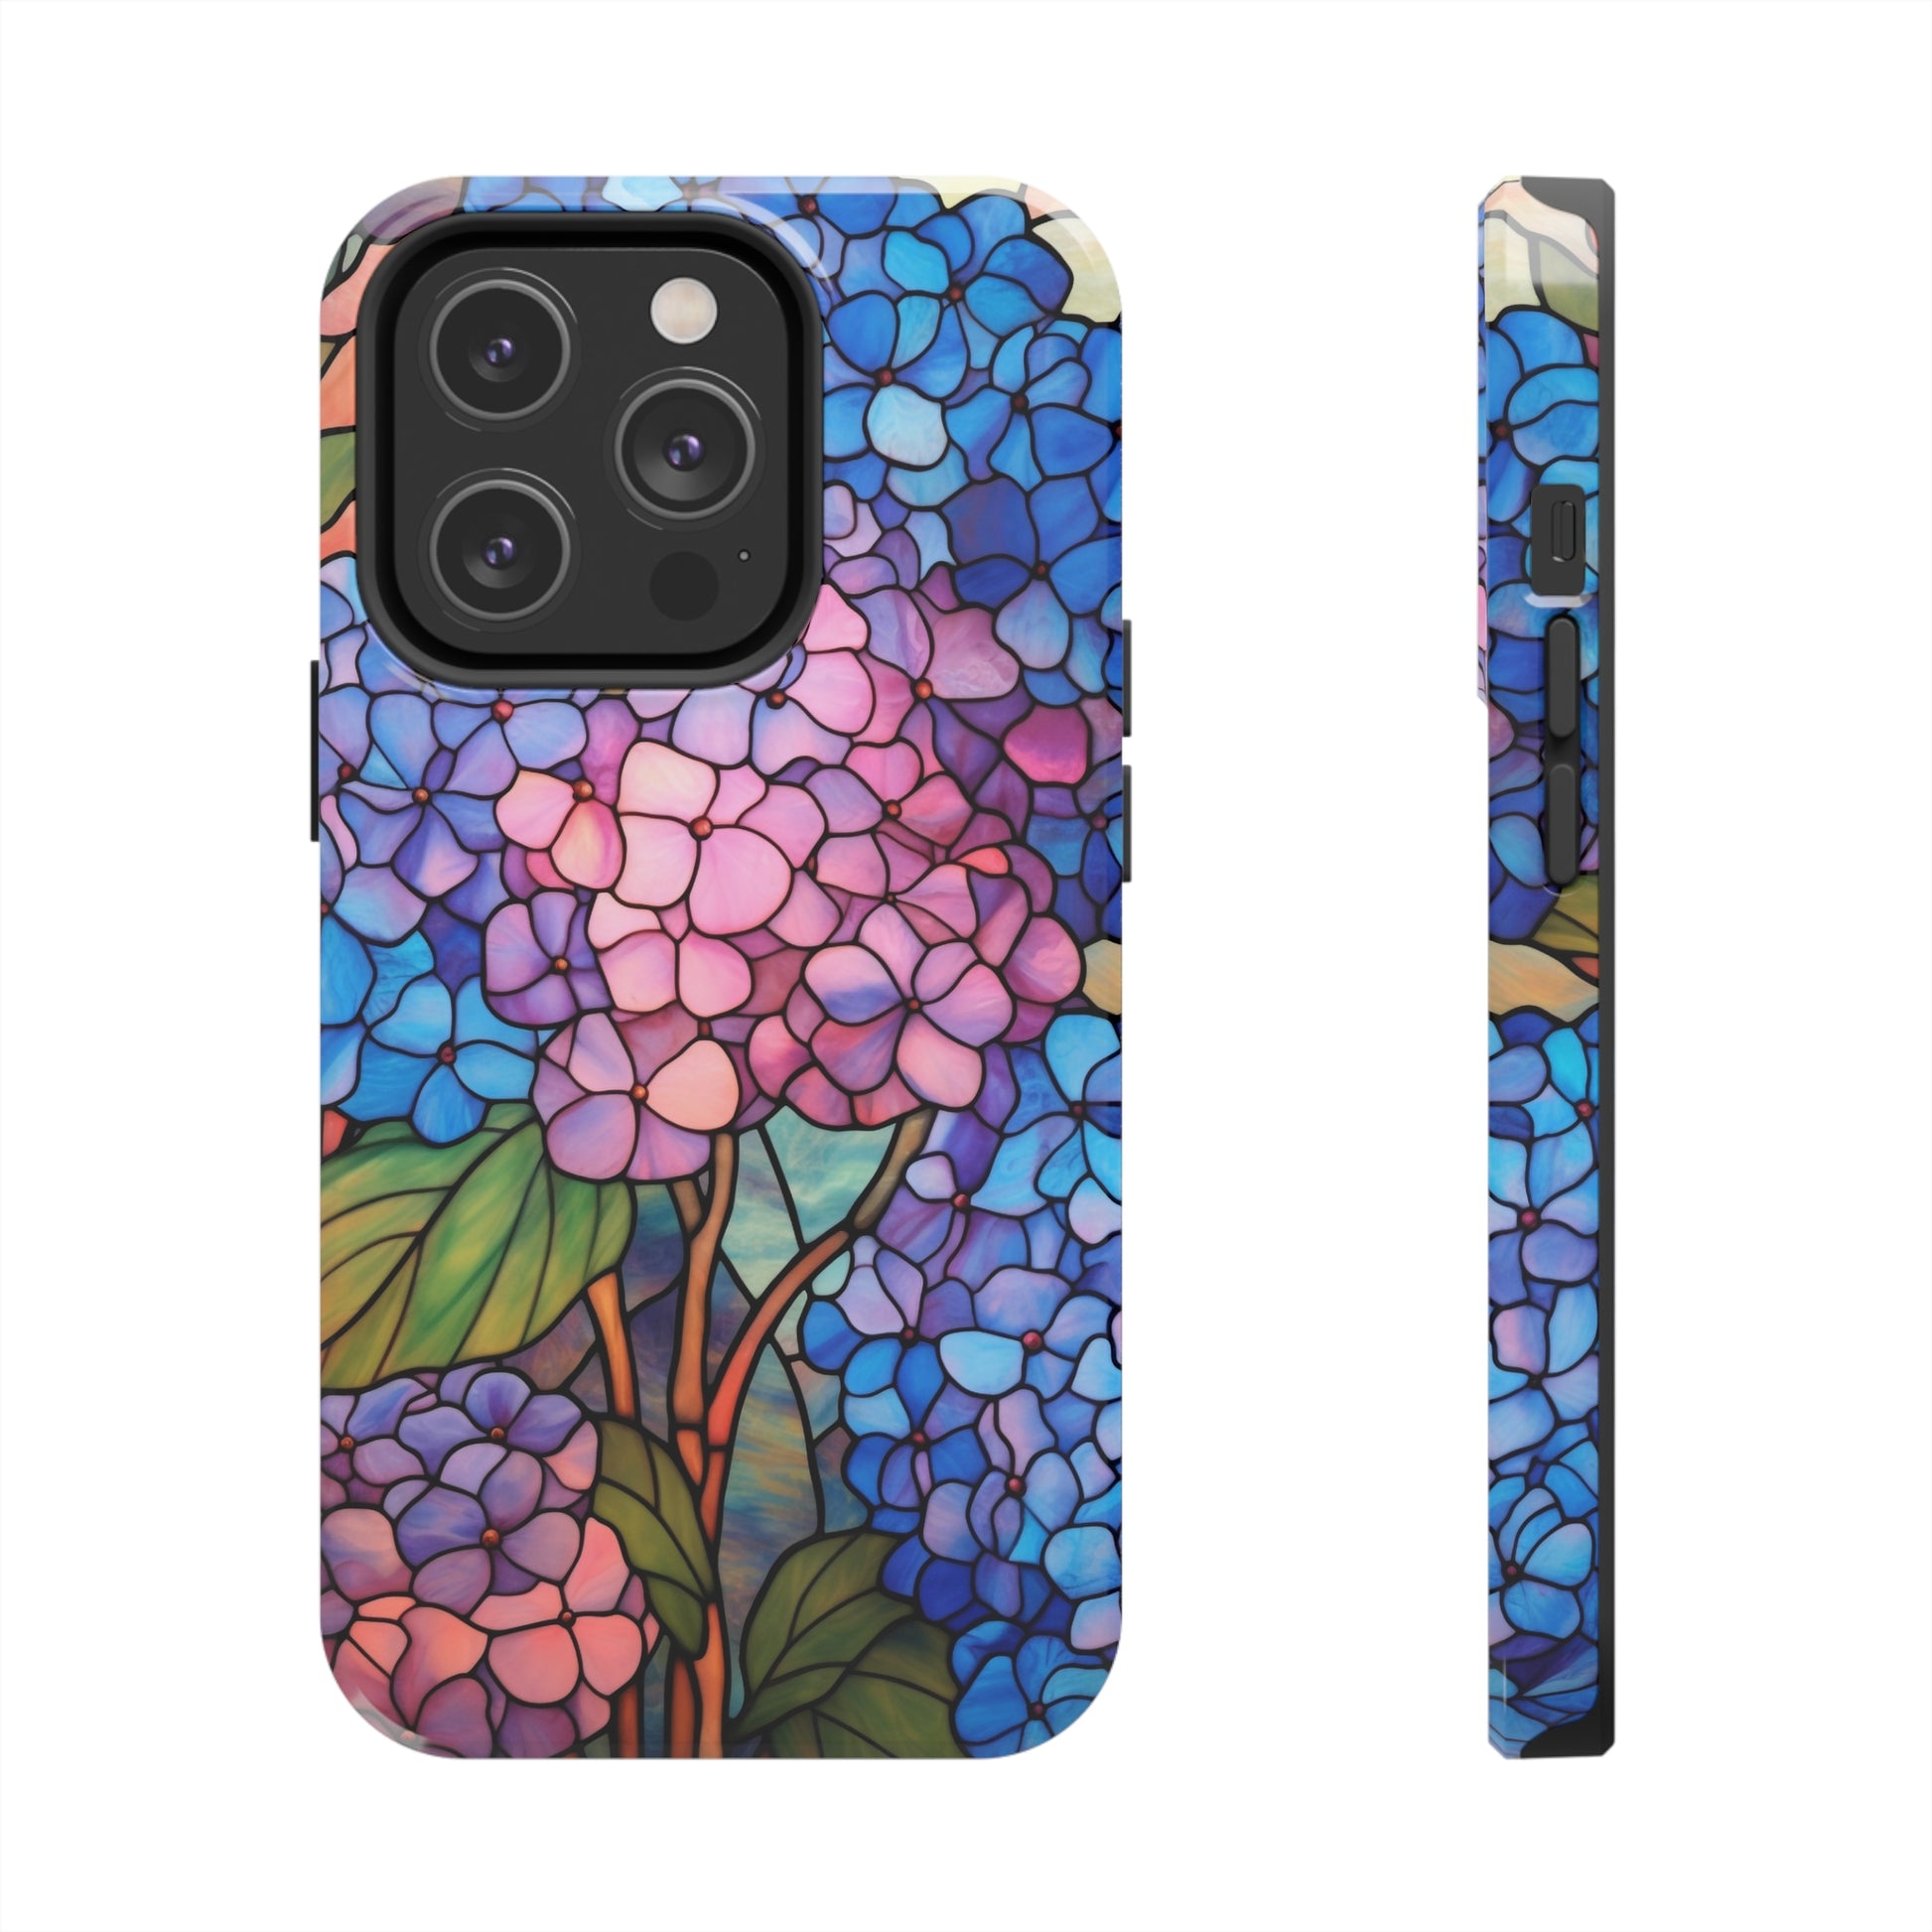 Stained Glass Floral design on iPhone Tough Case.